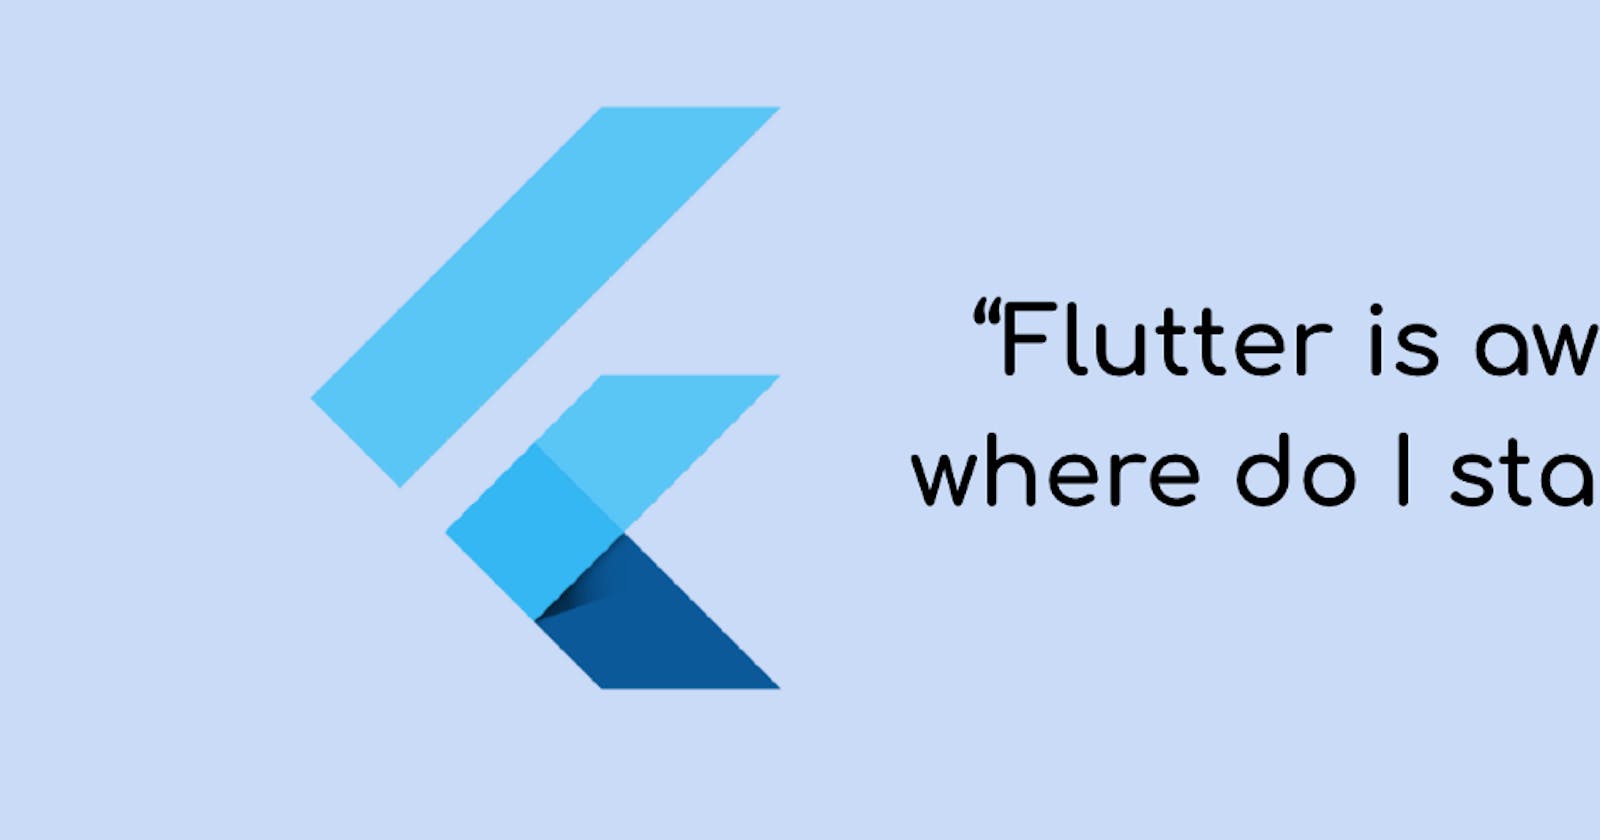 A list of Flutter Resources that would help start learning